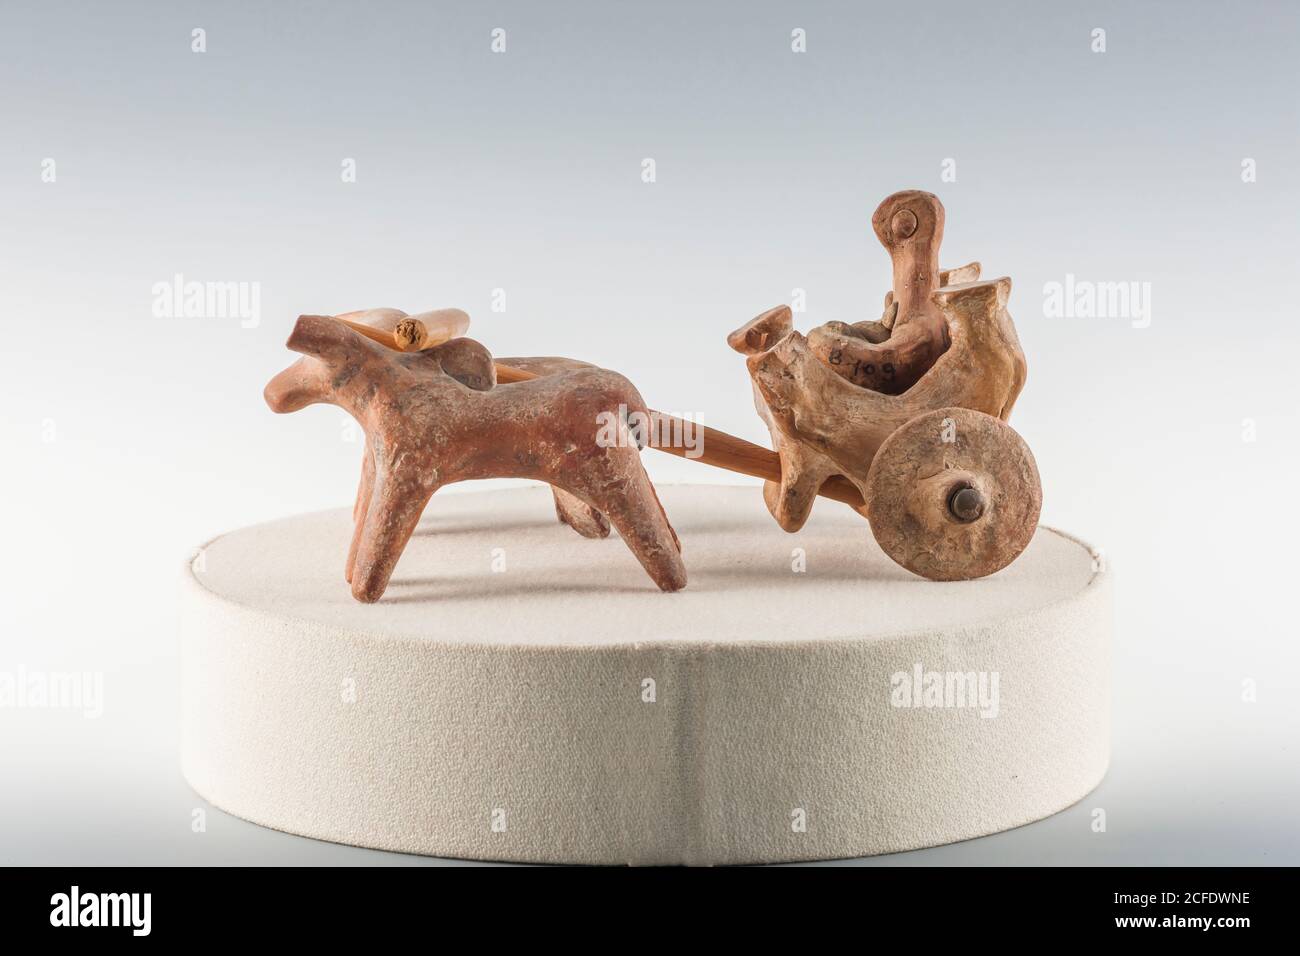 Bullock cart with man, from Mohenjo daro, Indus valley civilization Gallery, National Museum of Pakistan, Karachi, Sindh, Pakistan, South Asia, Asia Stock Photo